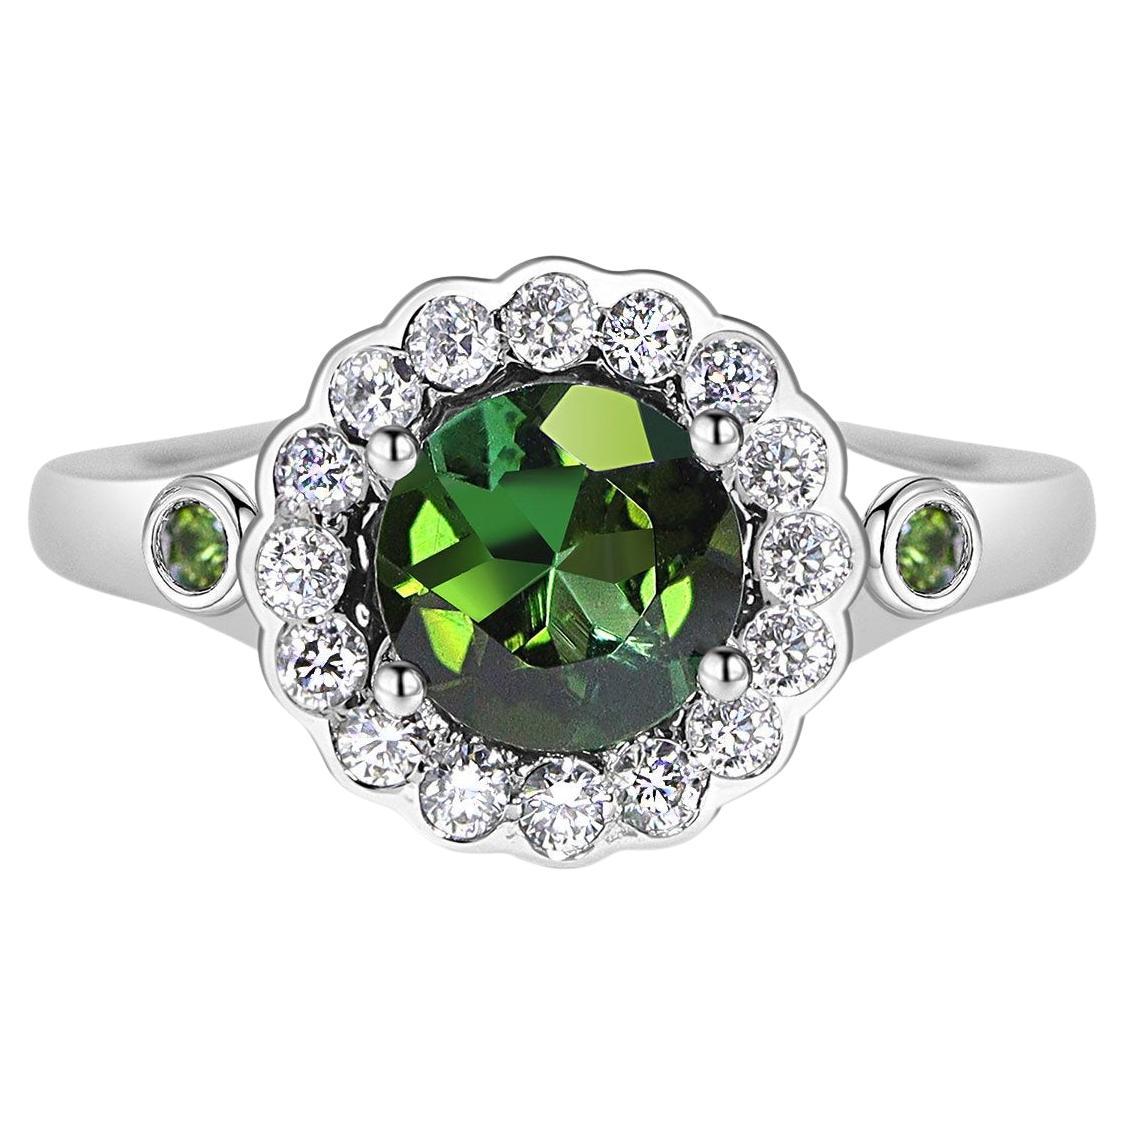 For Sale:  10k White Gold 1ct Natural Green Tourmaline & Diamond '.28t.c.w' Halo Ring